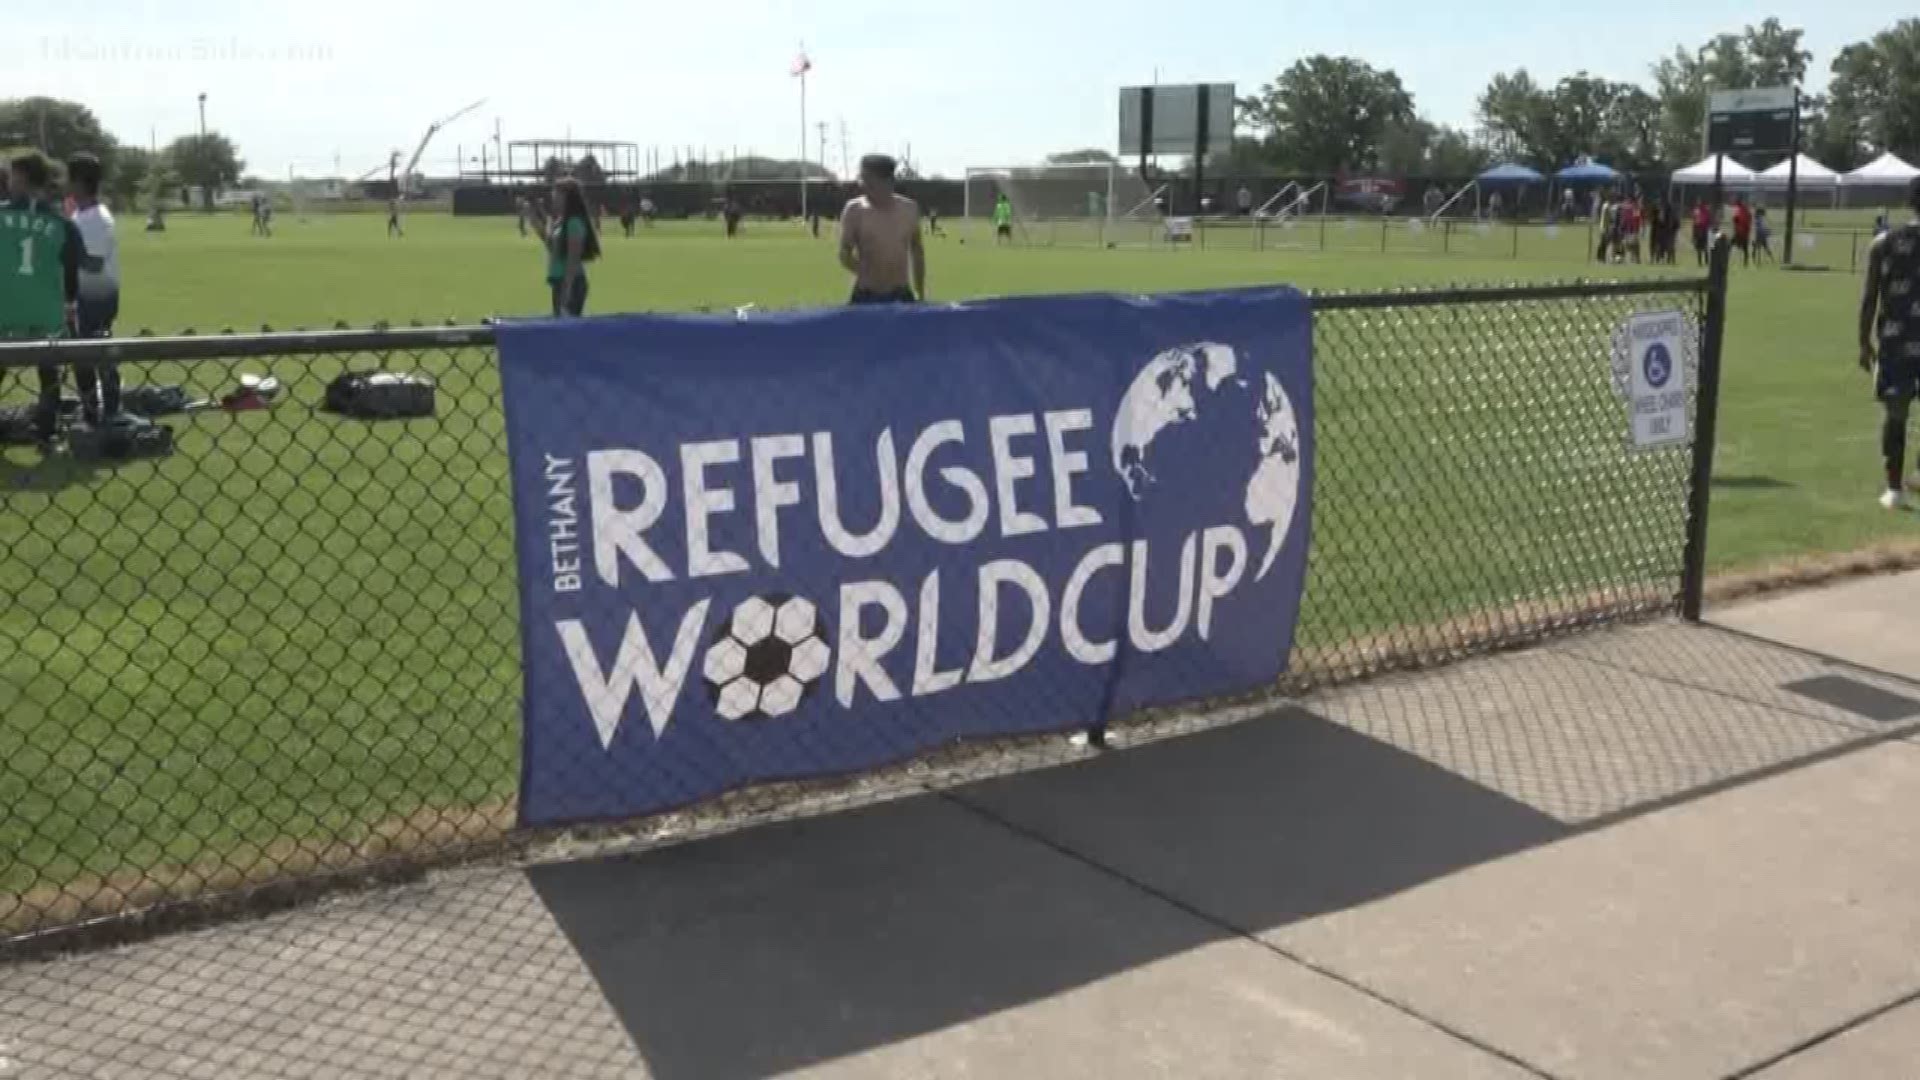 The soccer tournament commemorates World Refugee Day which was on June 20.